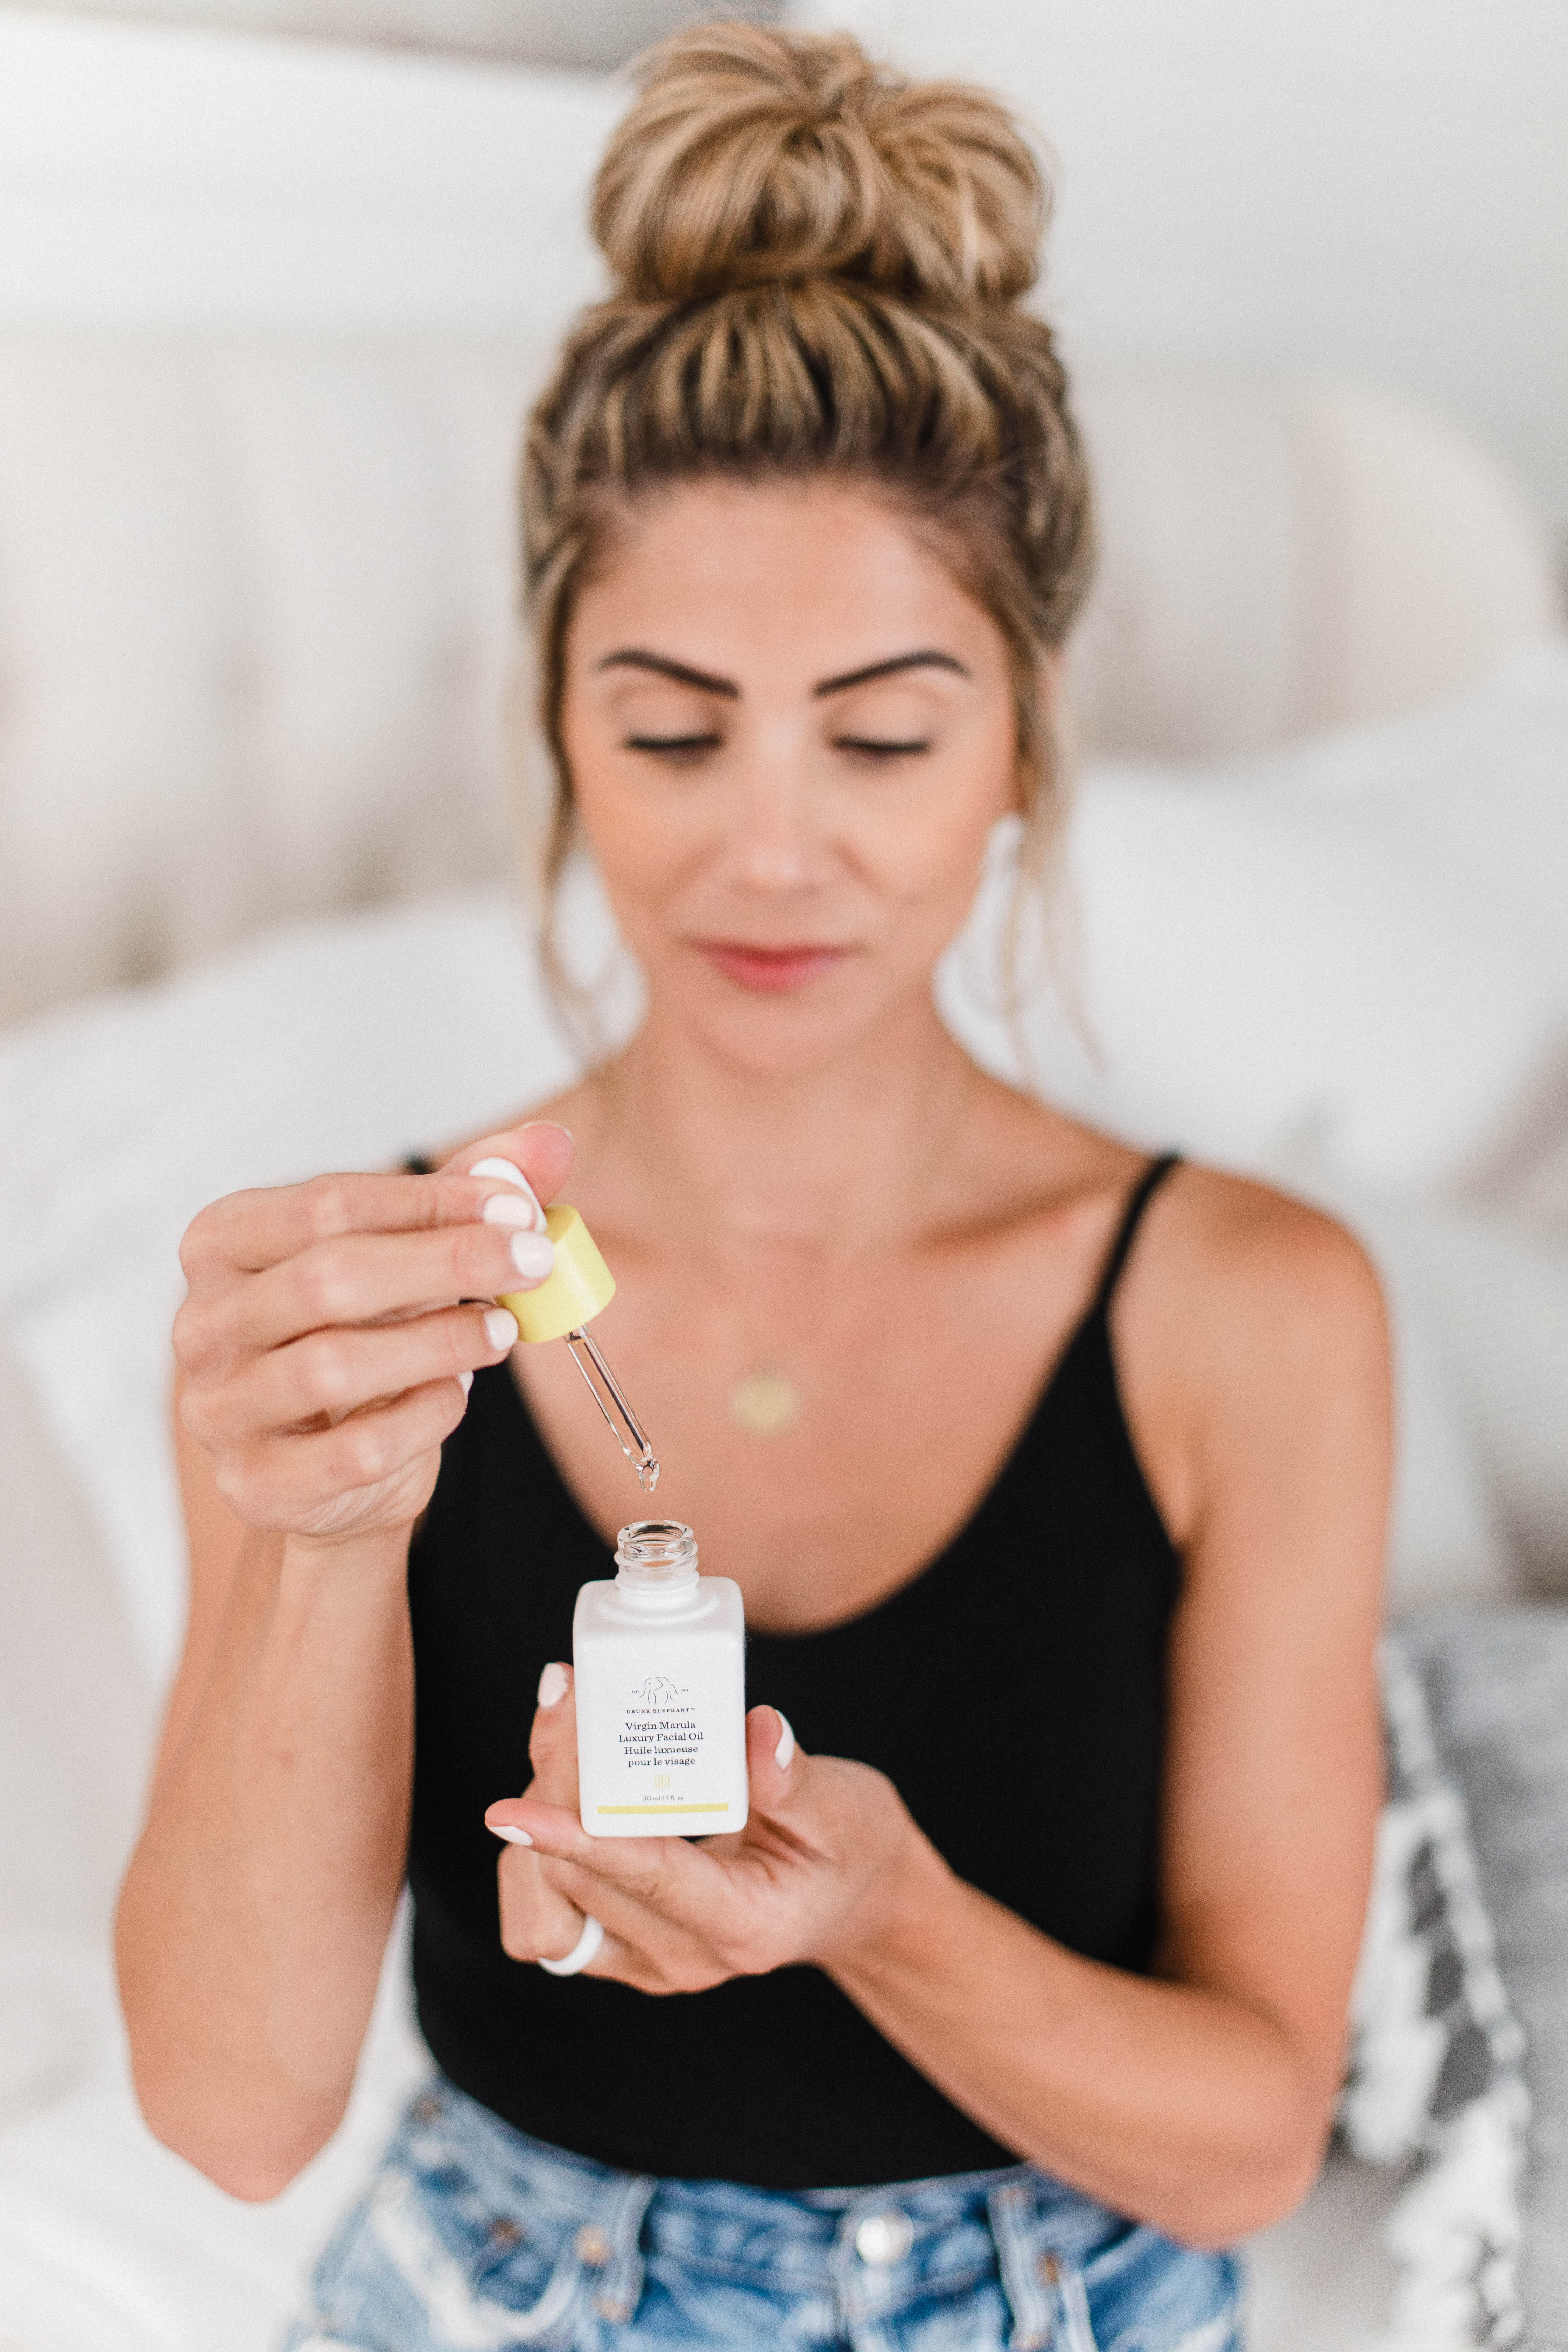 Connecticut life and style blogger Lauren McBride shares her morning and evening skincare routine, feauring a variety of clean skincare products.